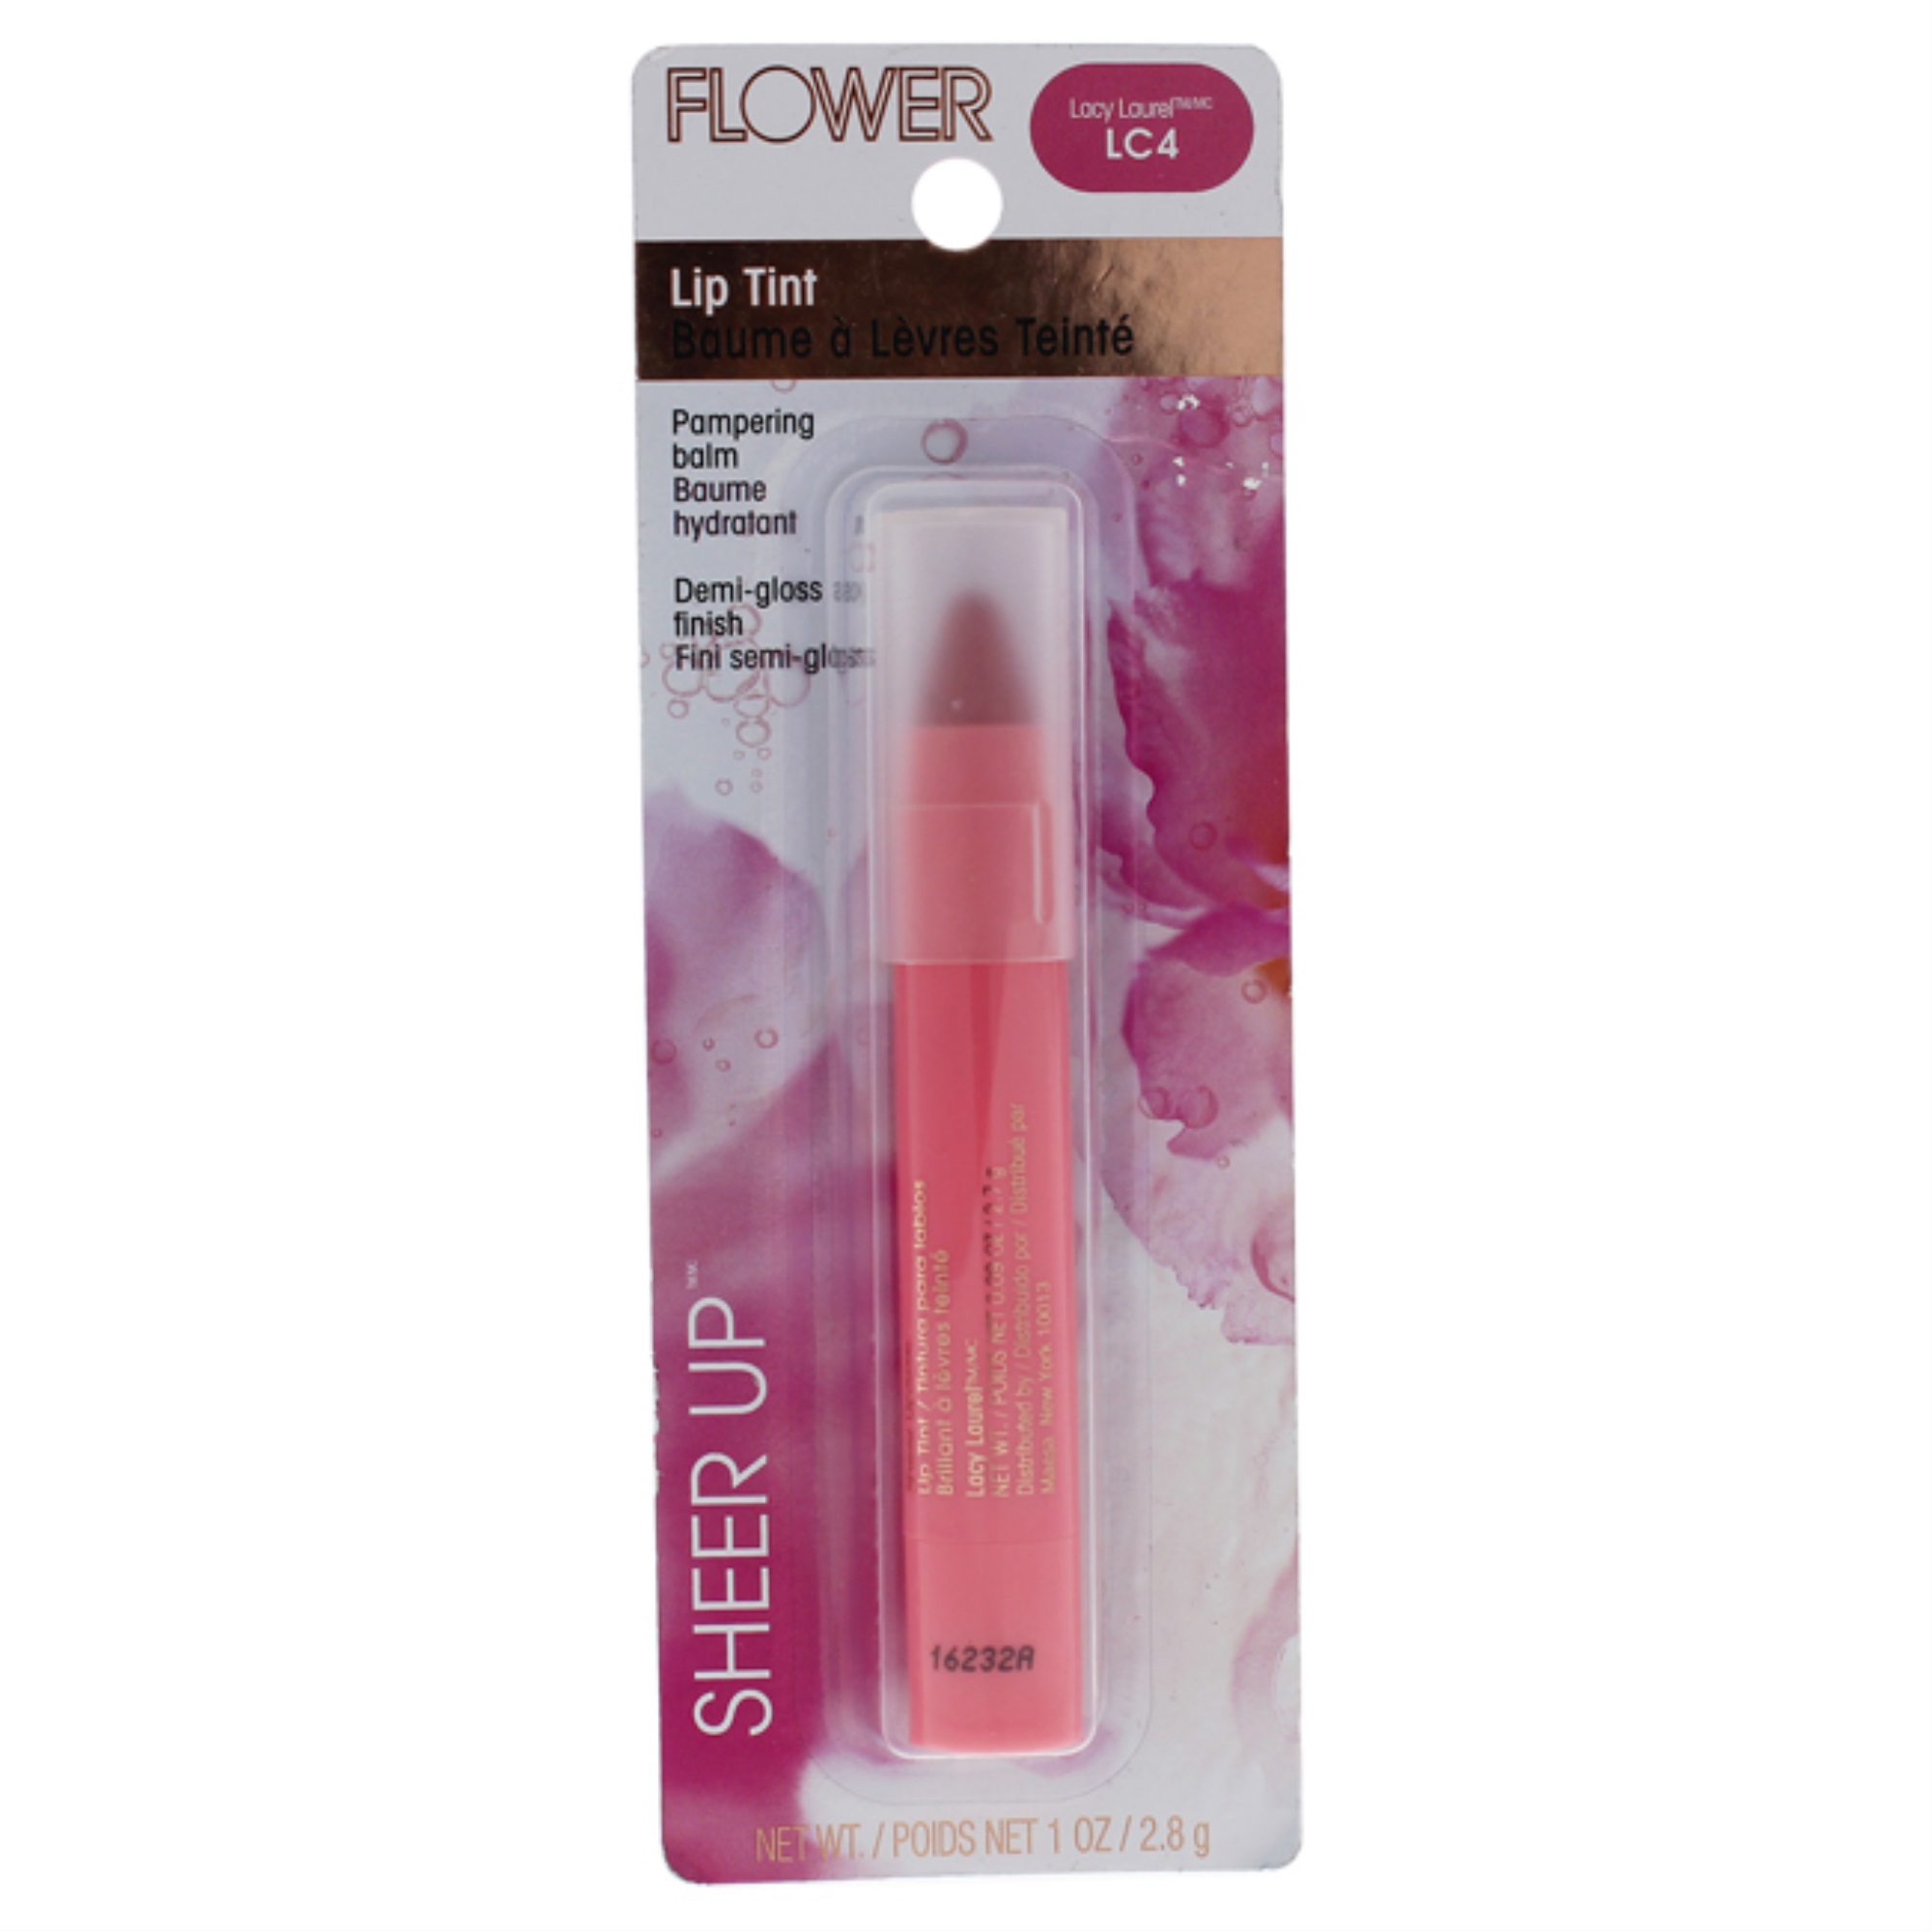 FLOWER Sheer Up Lip Tint, LC4 Lacy Laurel, 0.1 Oz. - image 1 of 2